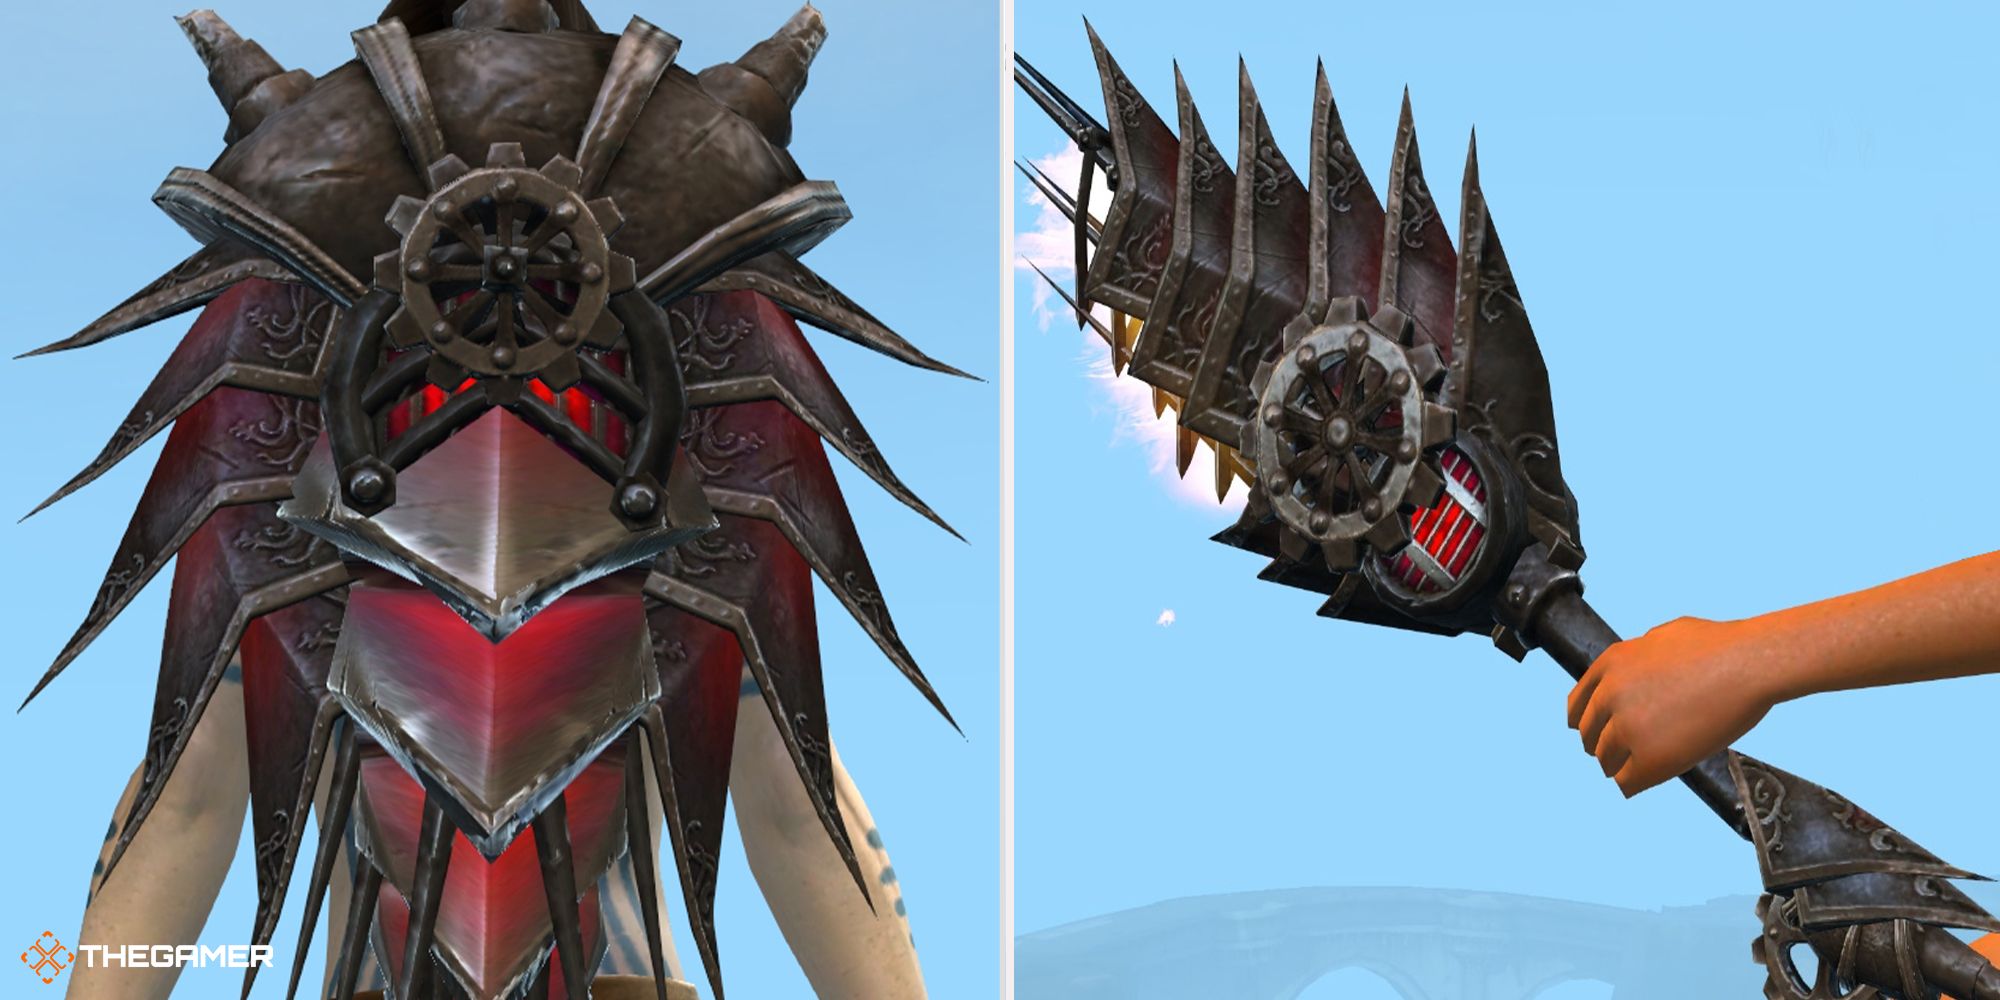 Guild Wars 2 - Machined weapon skins